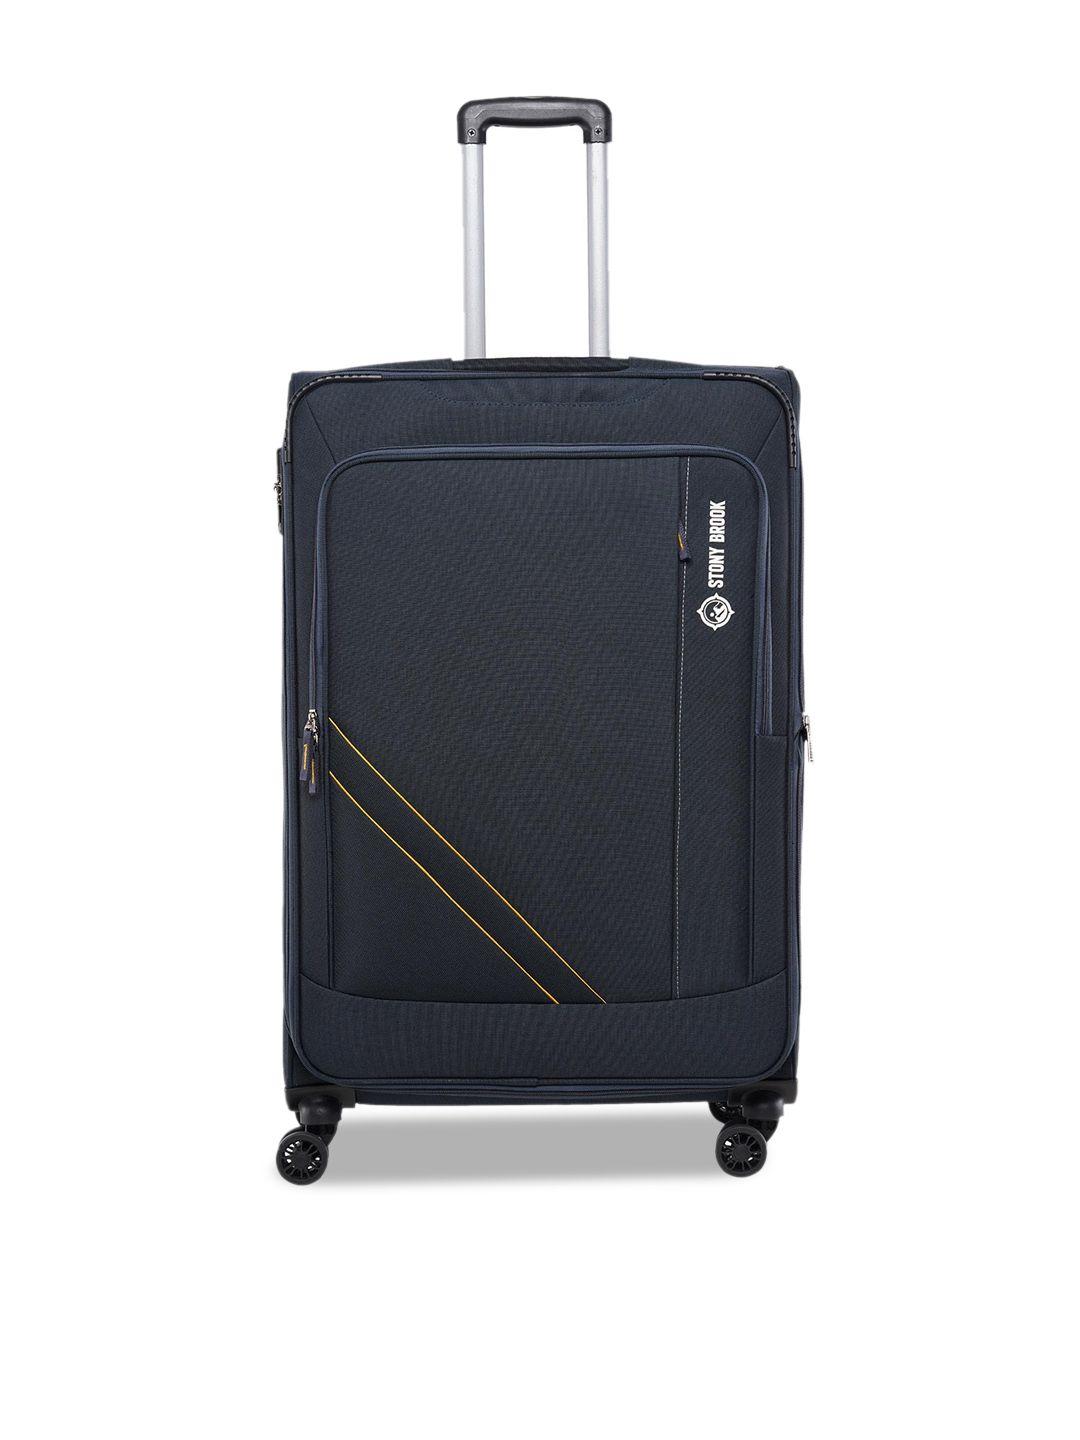 stony brook by nasher miles soft-sided large trolley suitcase